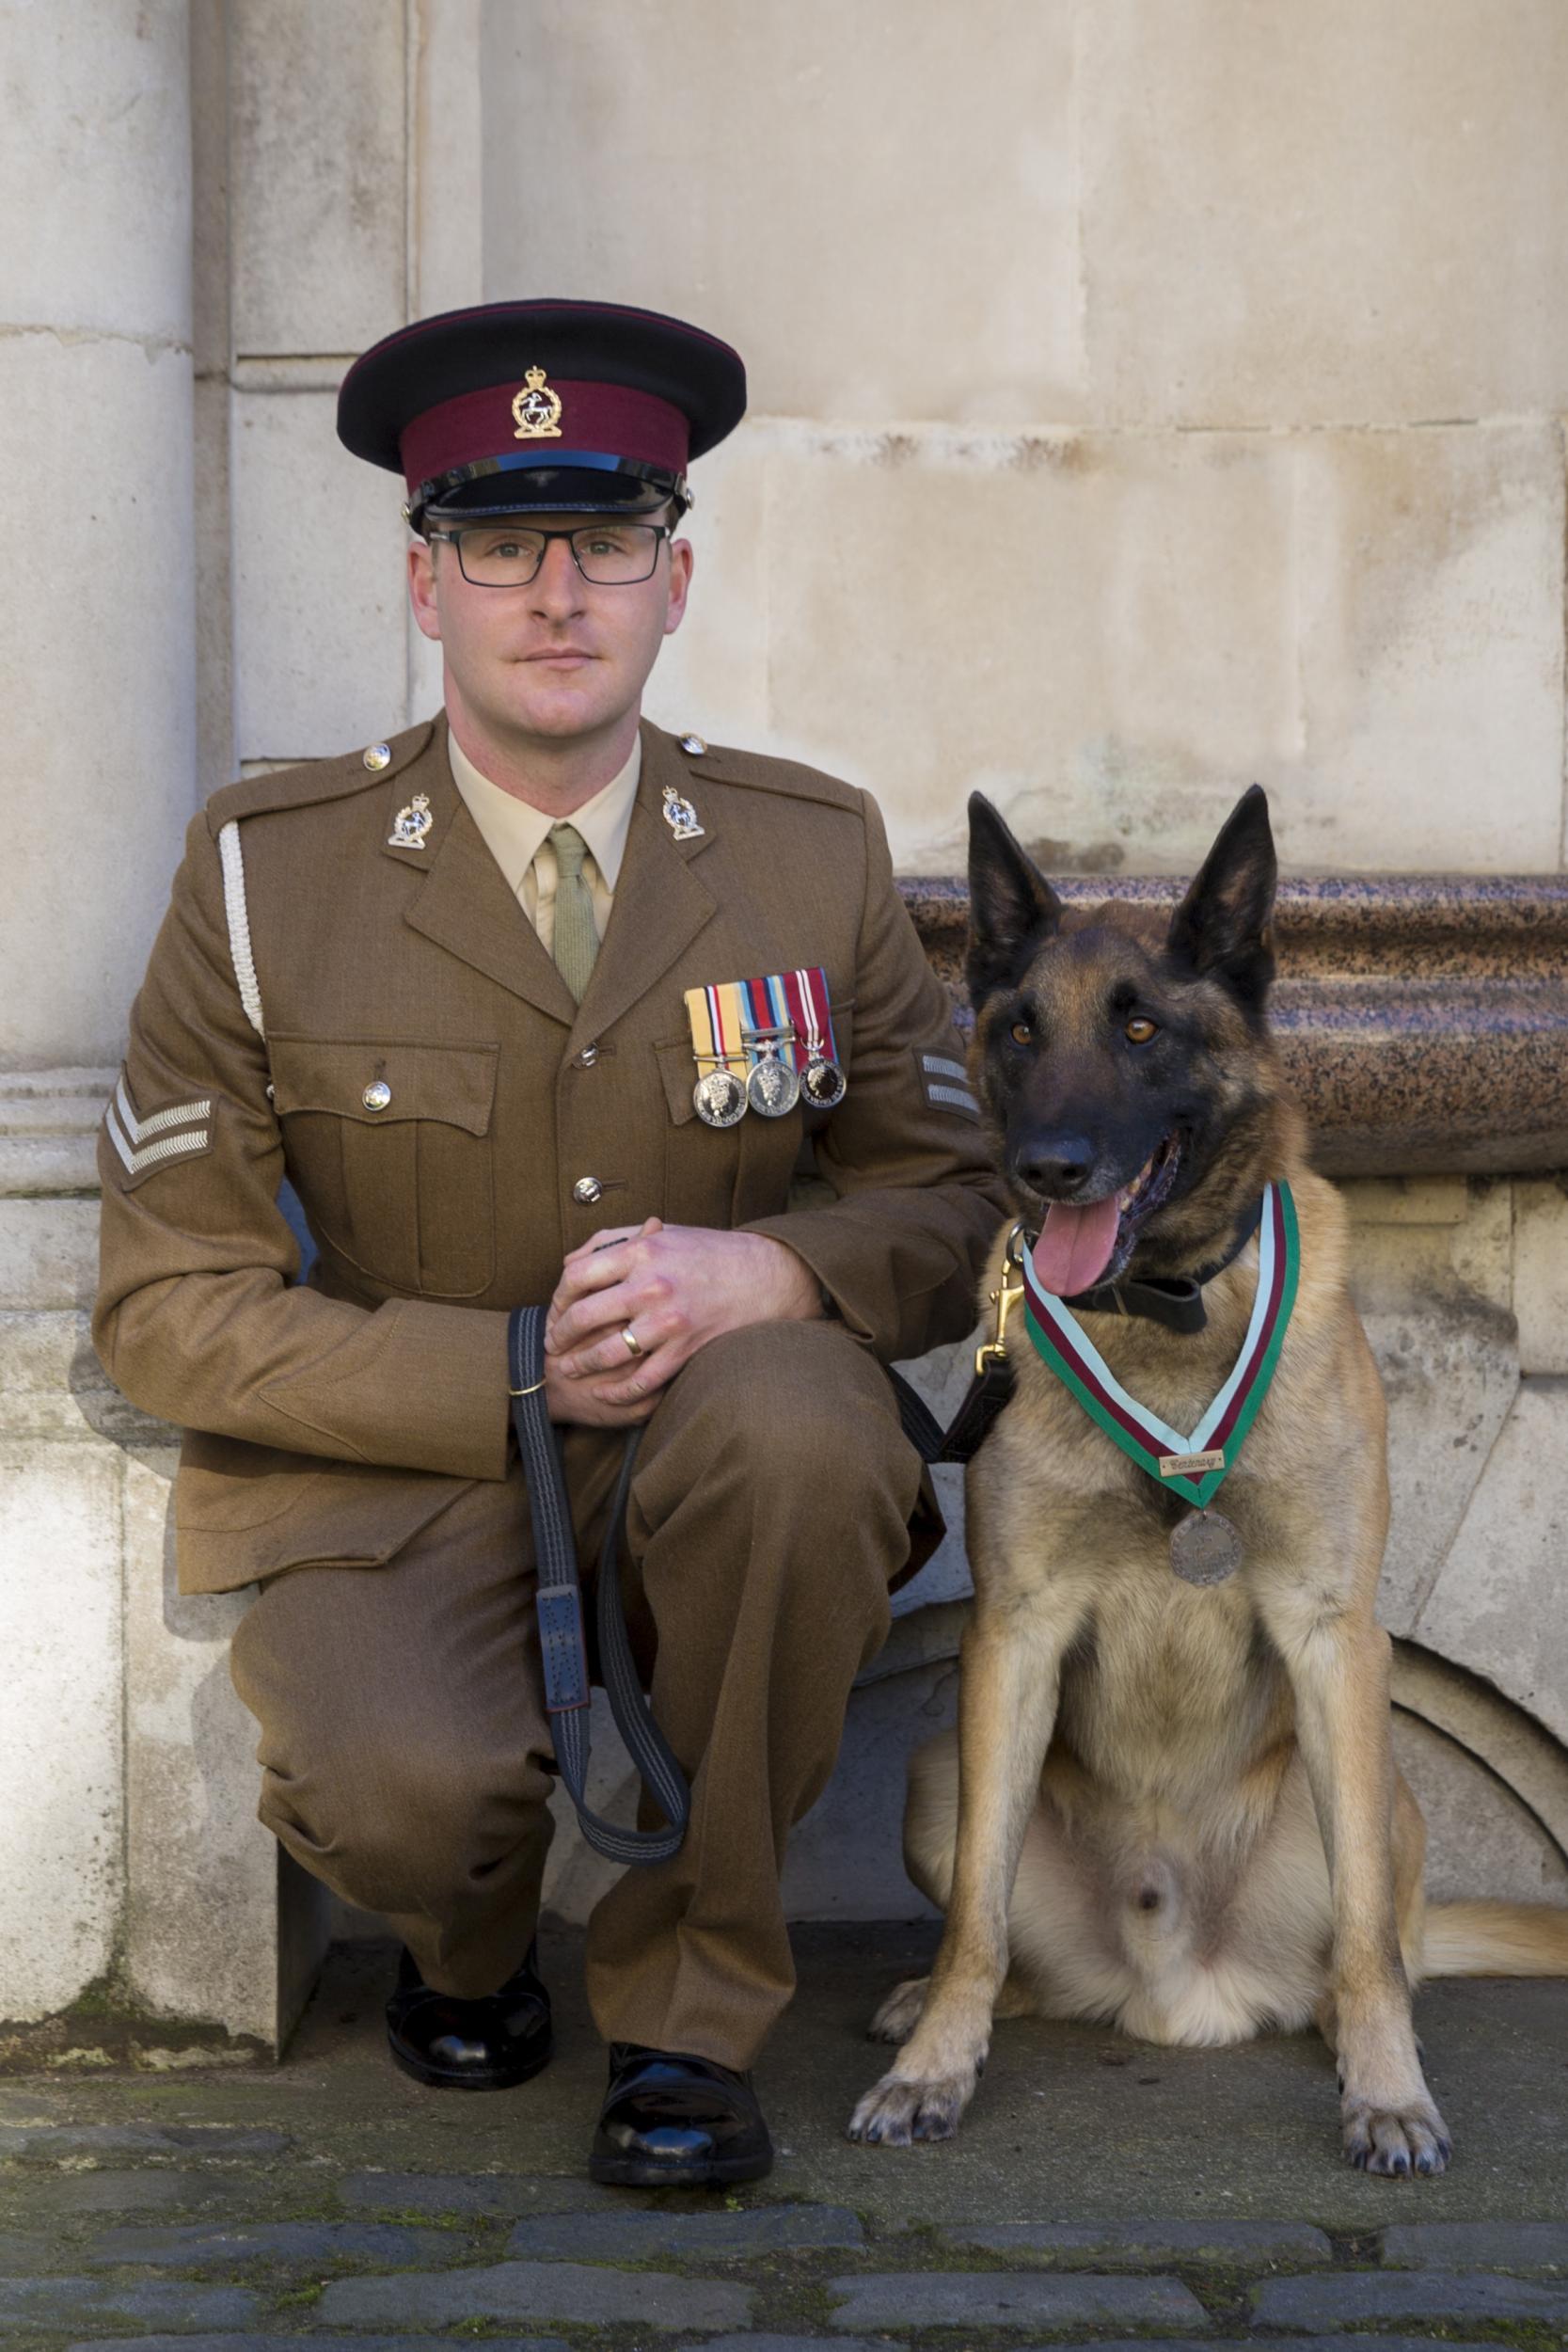 Mali, sporting his medal, with handler Corporal Daniel Hatley